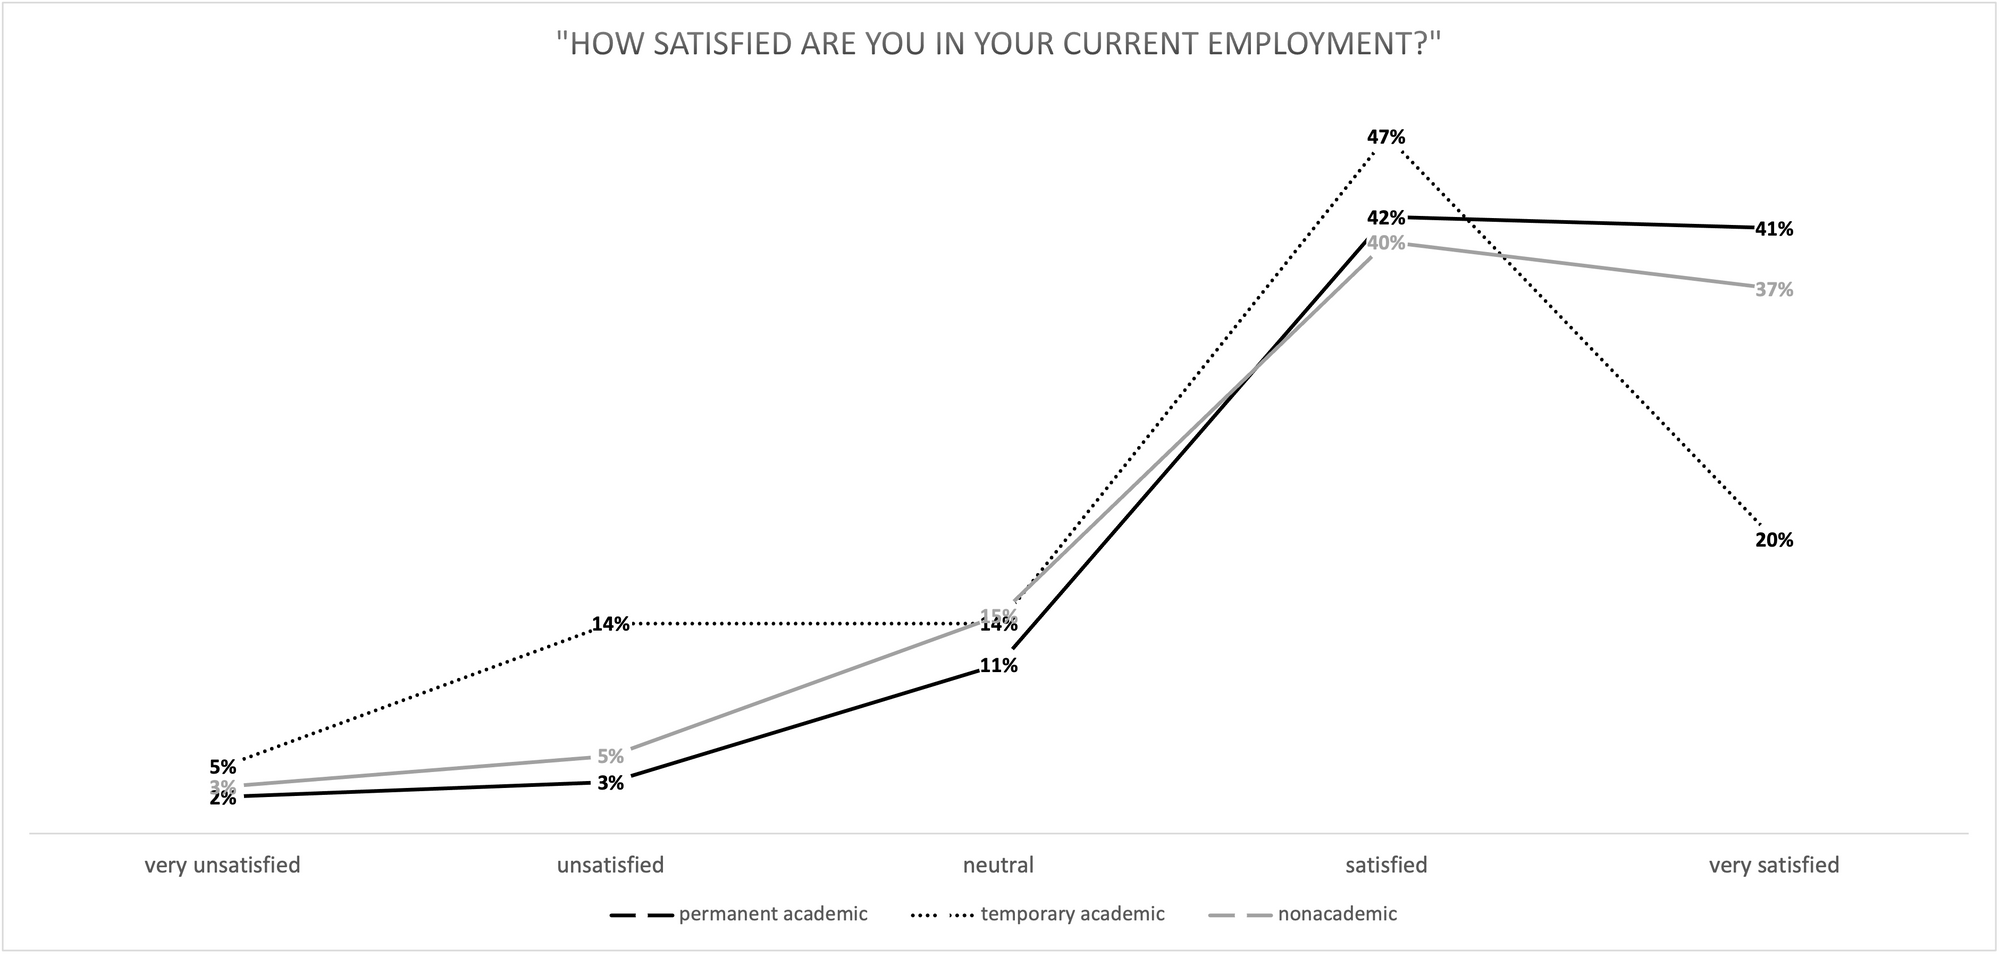 Chart showing employment satisfaction for permanent academic, temporary academic, and nonacademic employment.